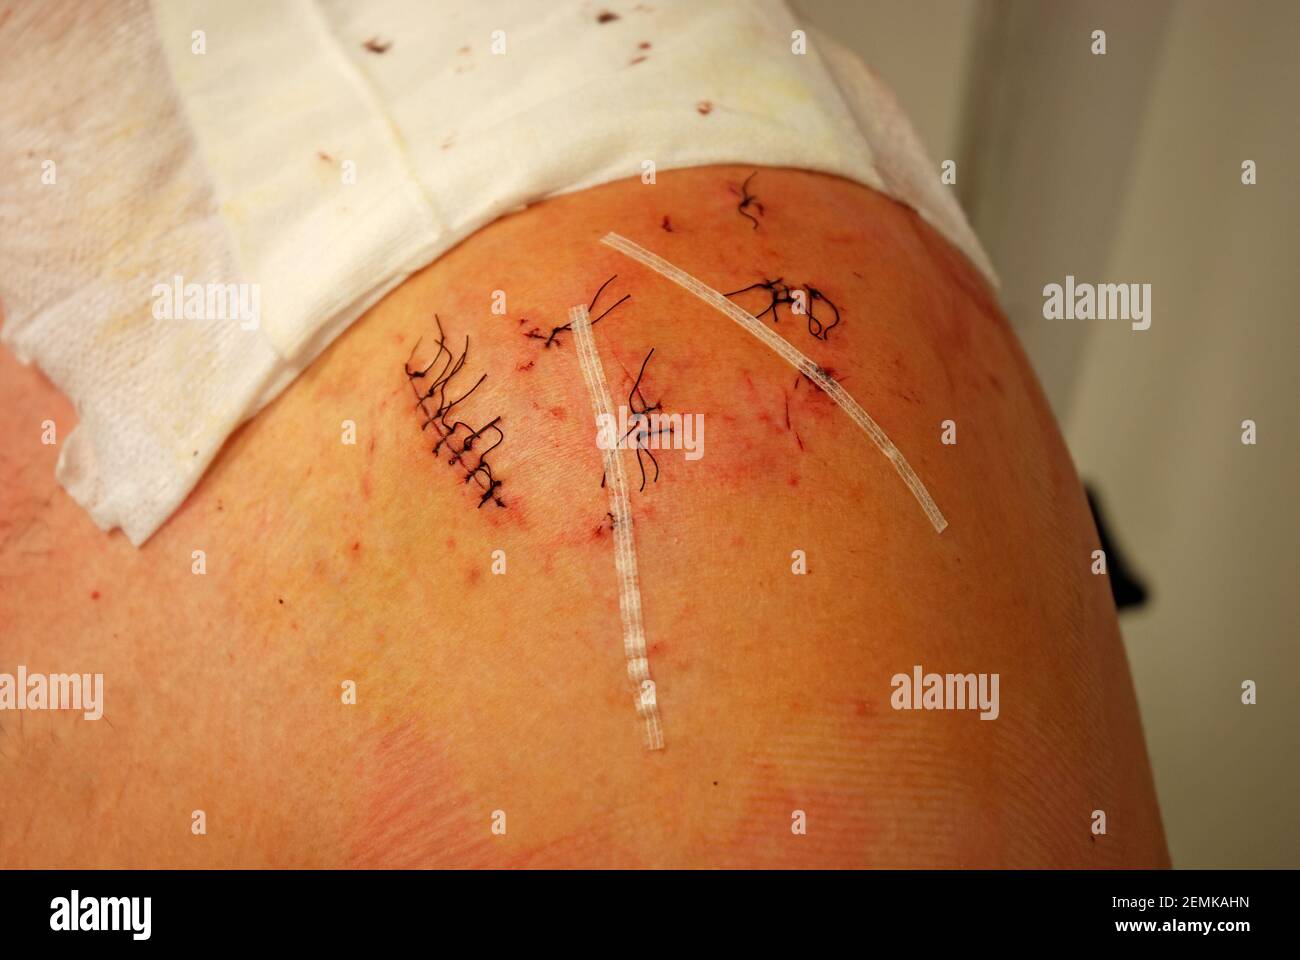 A person shows the stitches after shoulder surgery and a sterile gauze dressing. Stock Photo